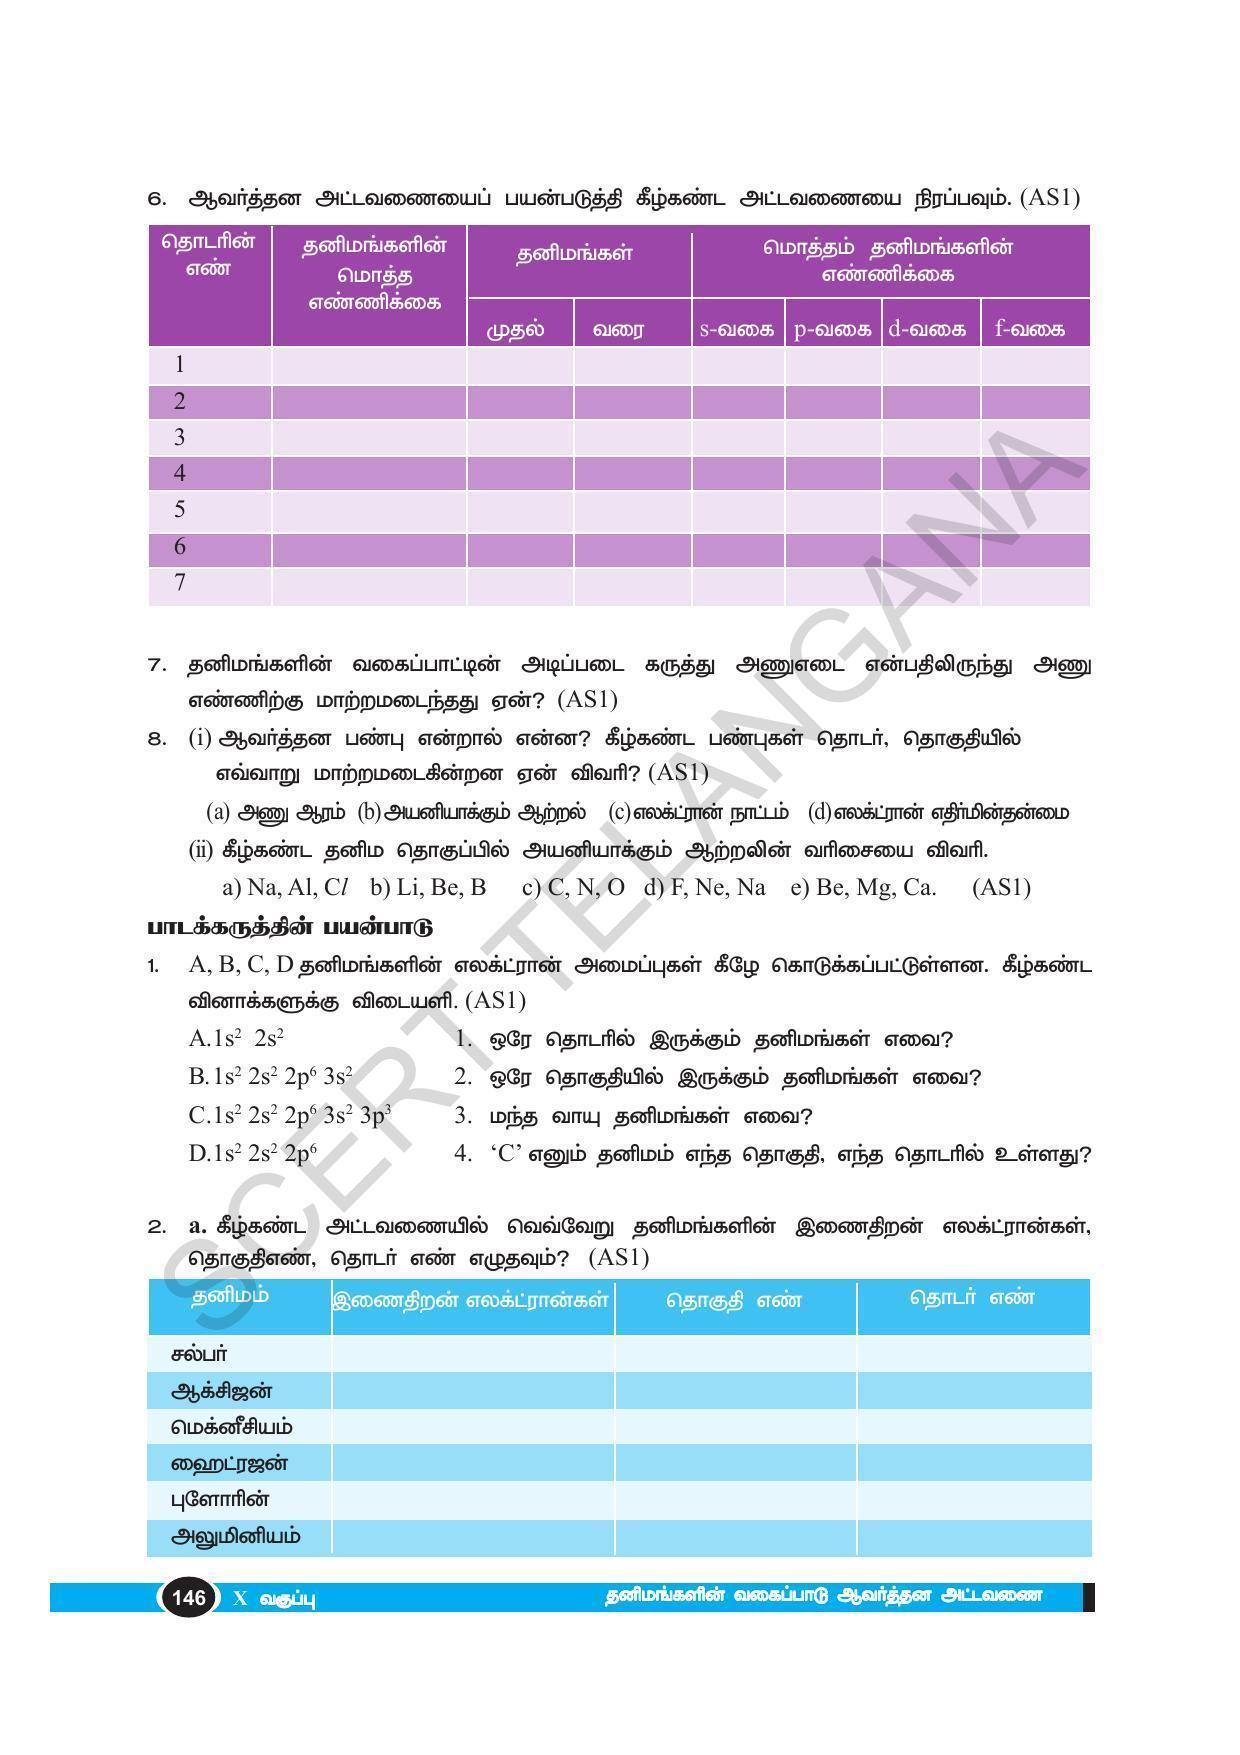 TS SCERT Class 10 Physical Science(Tamil Medium) Text Book - Page 158